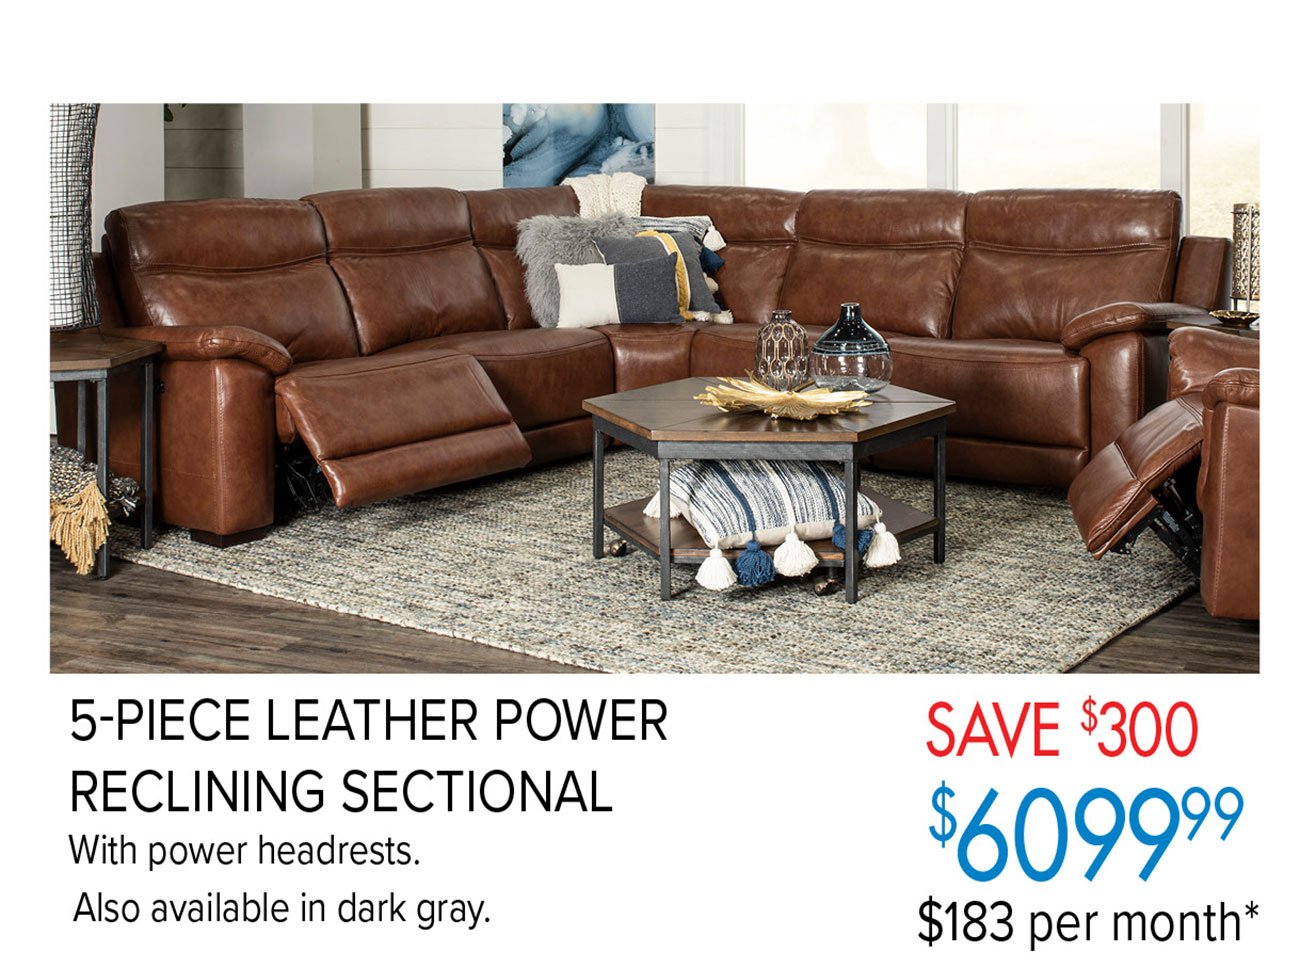  5-PIECE LEATHER POWER SAVE 300 RECLINING SECTIONAL With power headrests. Also available in dark gray. $183 per month* 